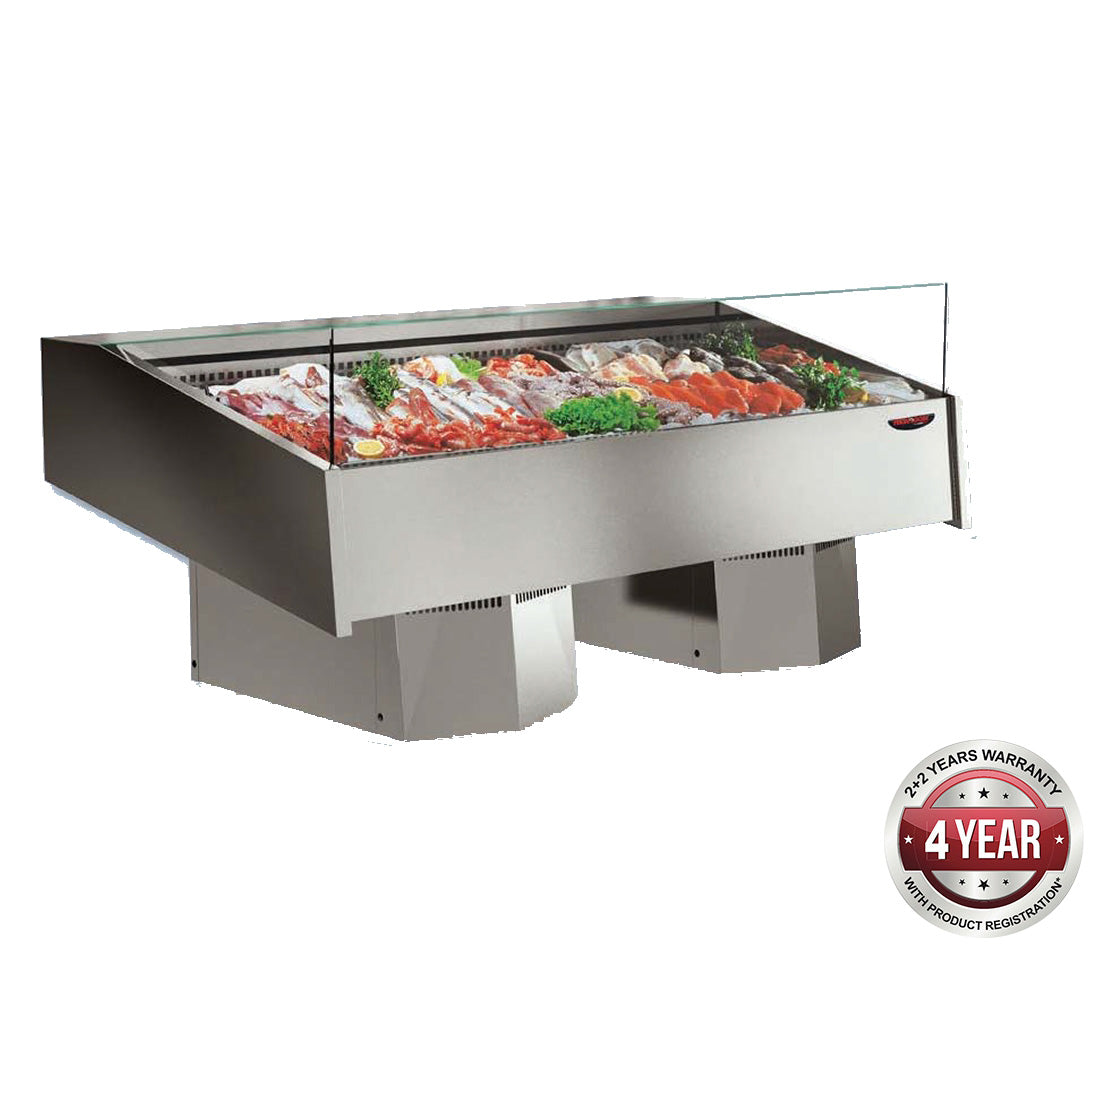 Multiplexable Serve-over Refrigerated Fish Open Display - FSG2000